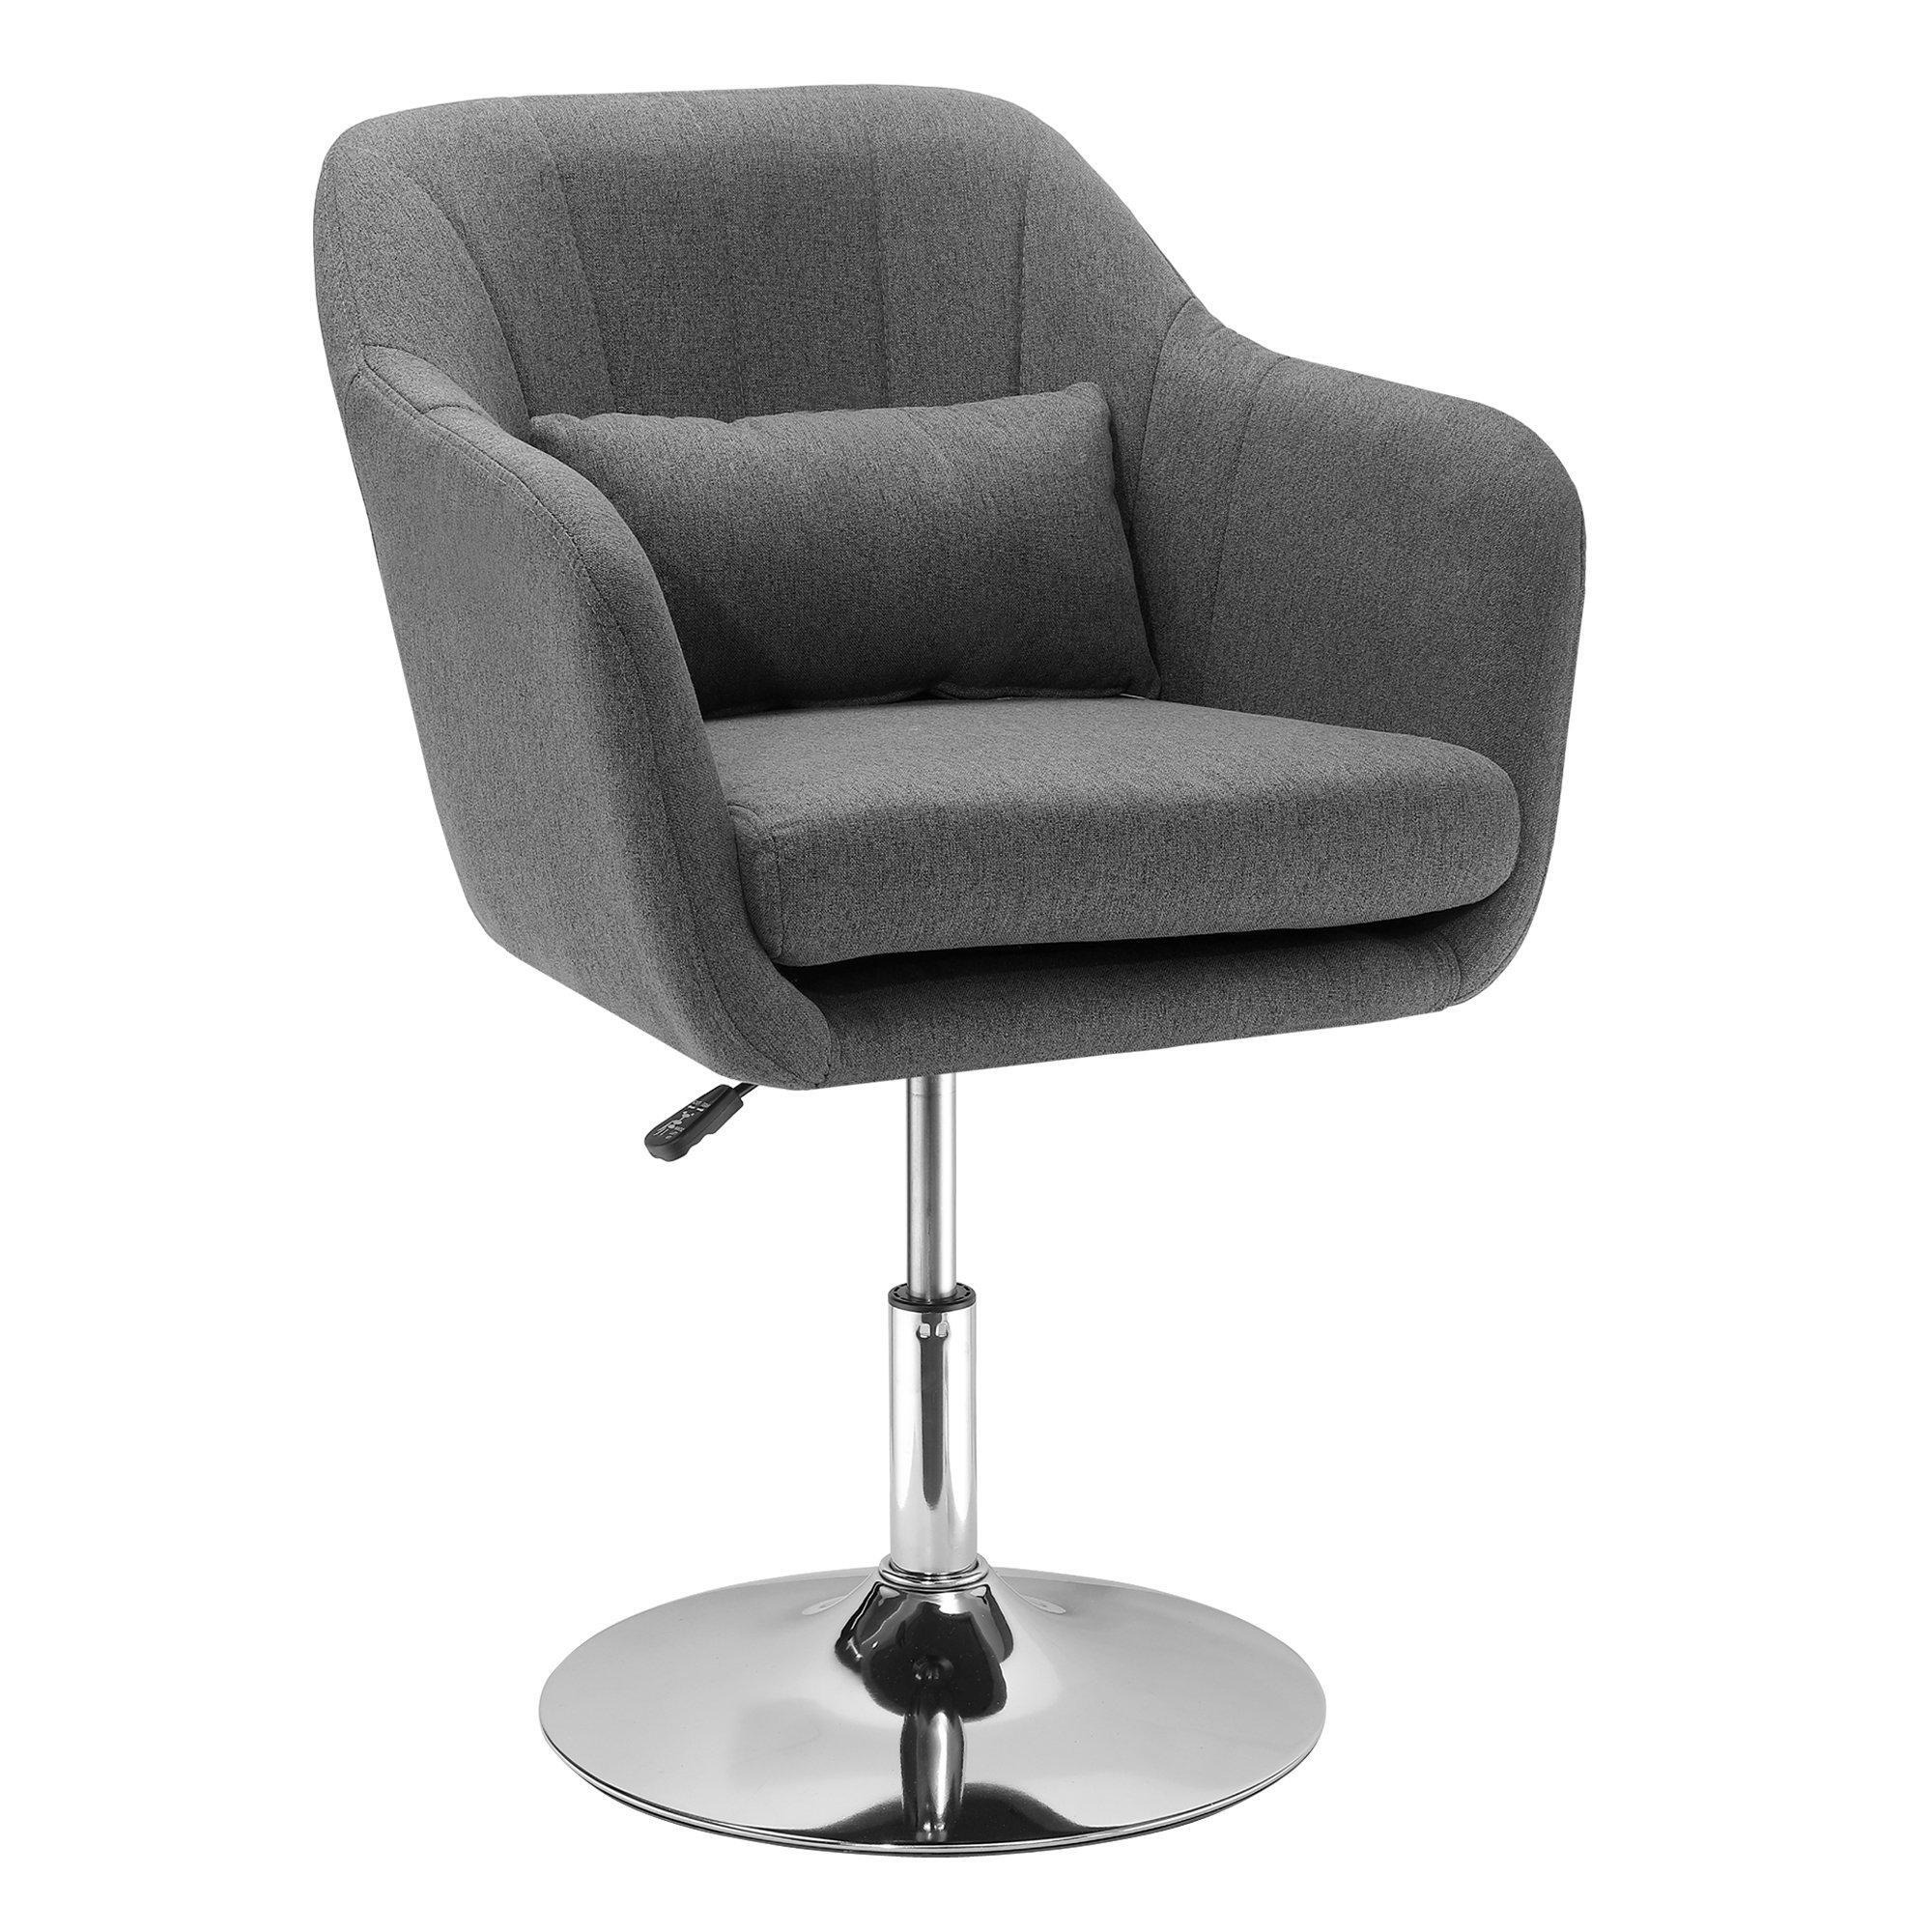 Retro Linen Swivel Tub Chair with Steel Frame Cushion Wide Seat - image 1